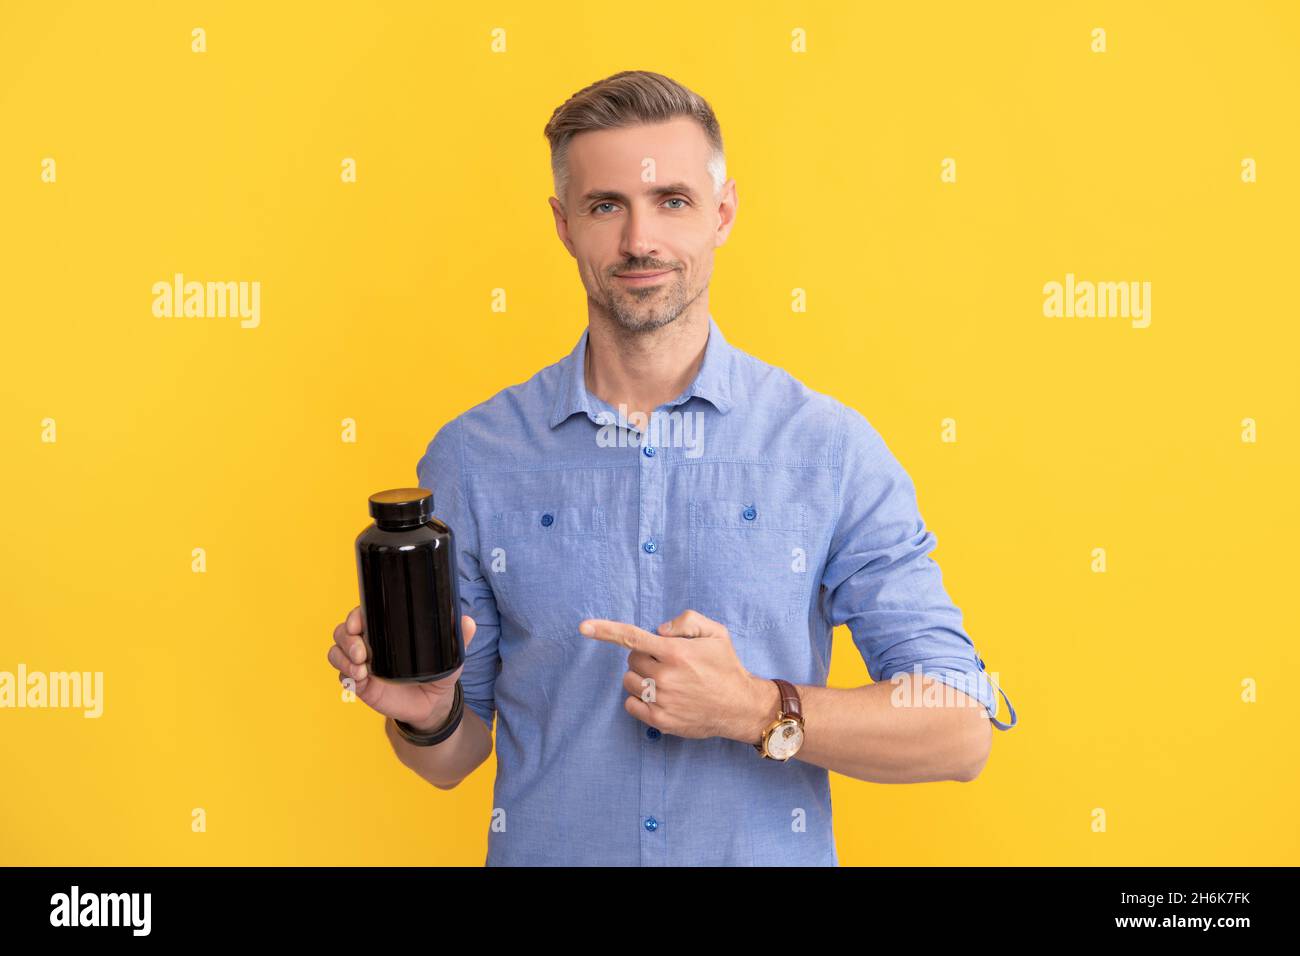 adult guy pointing finger on drug jar on yellow background, food additive Stock Photo